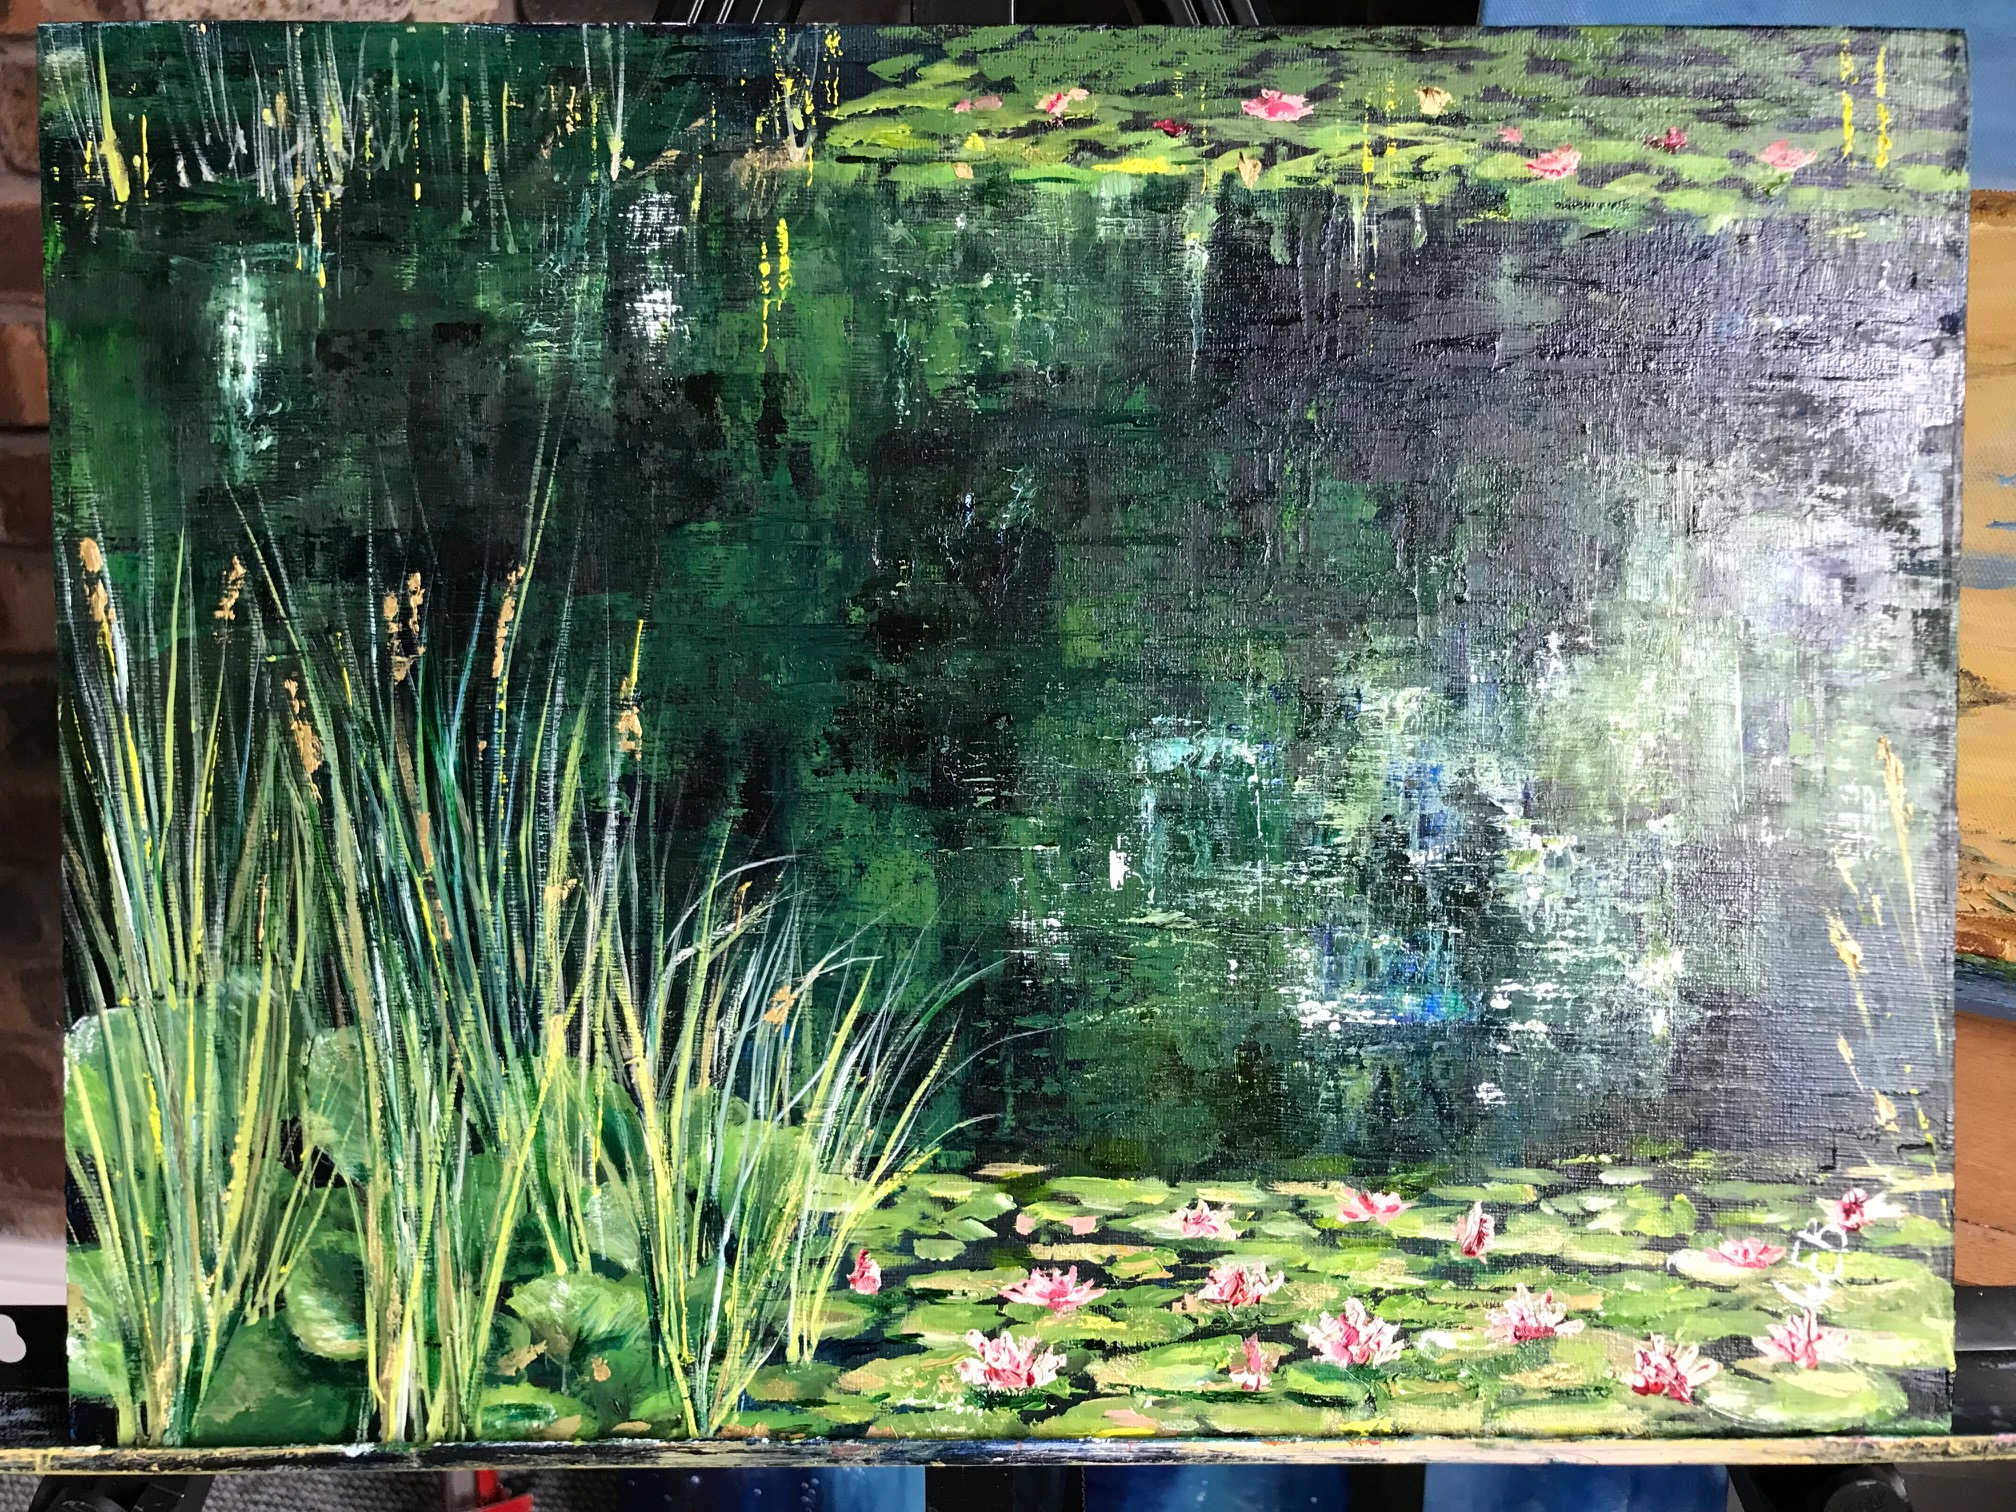 Waterlilies at Grappenhall